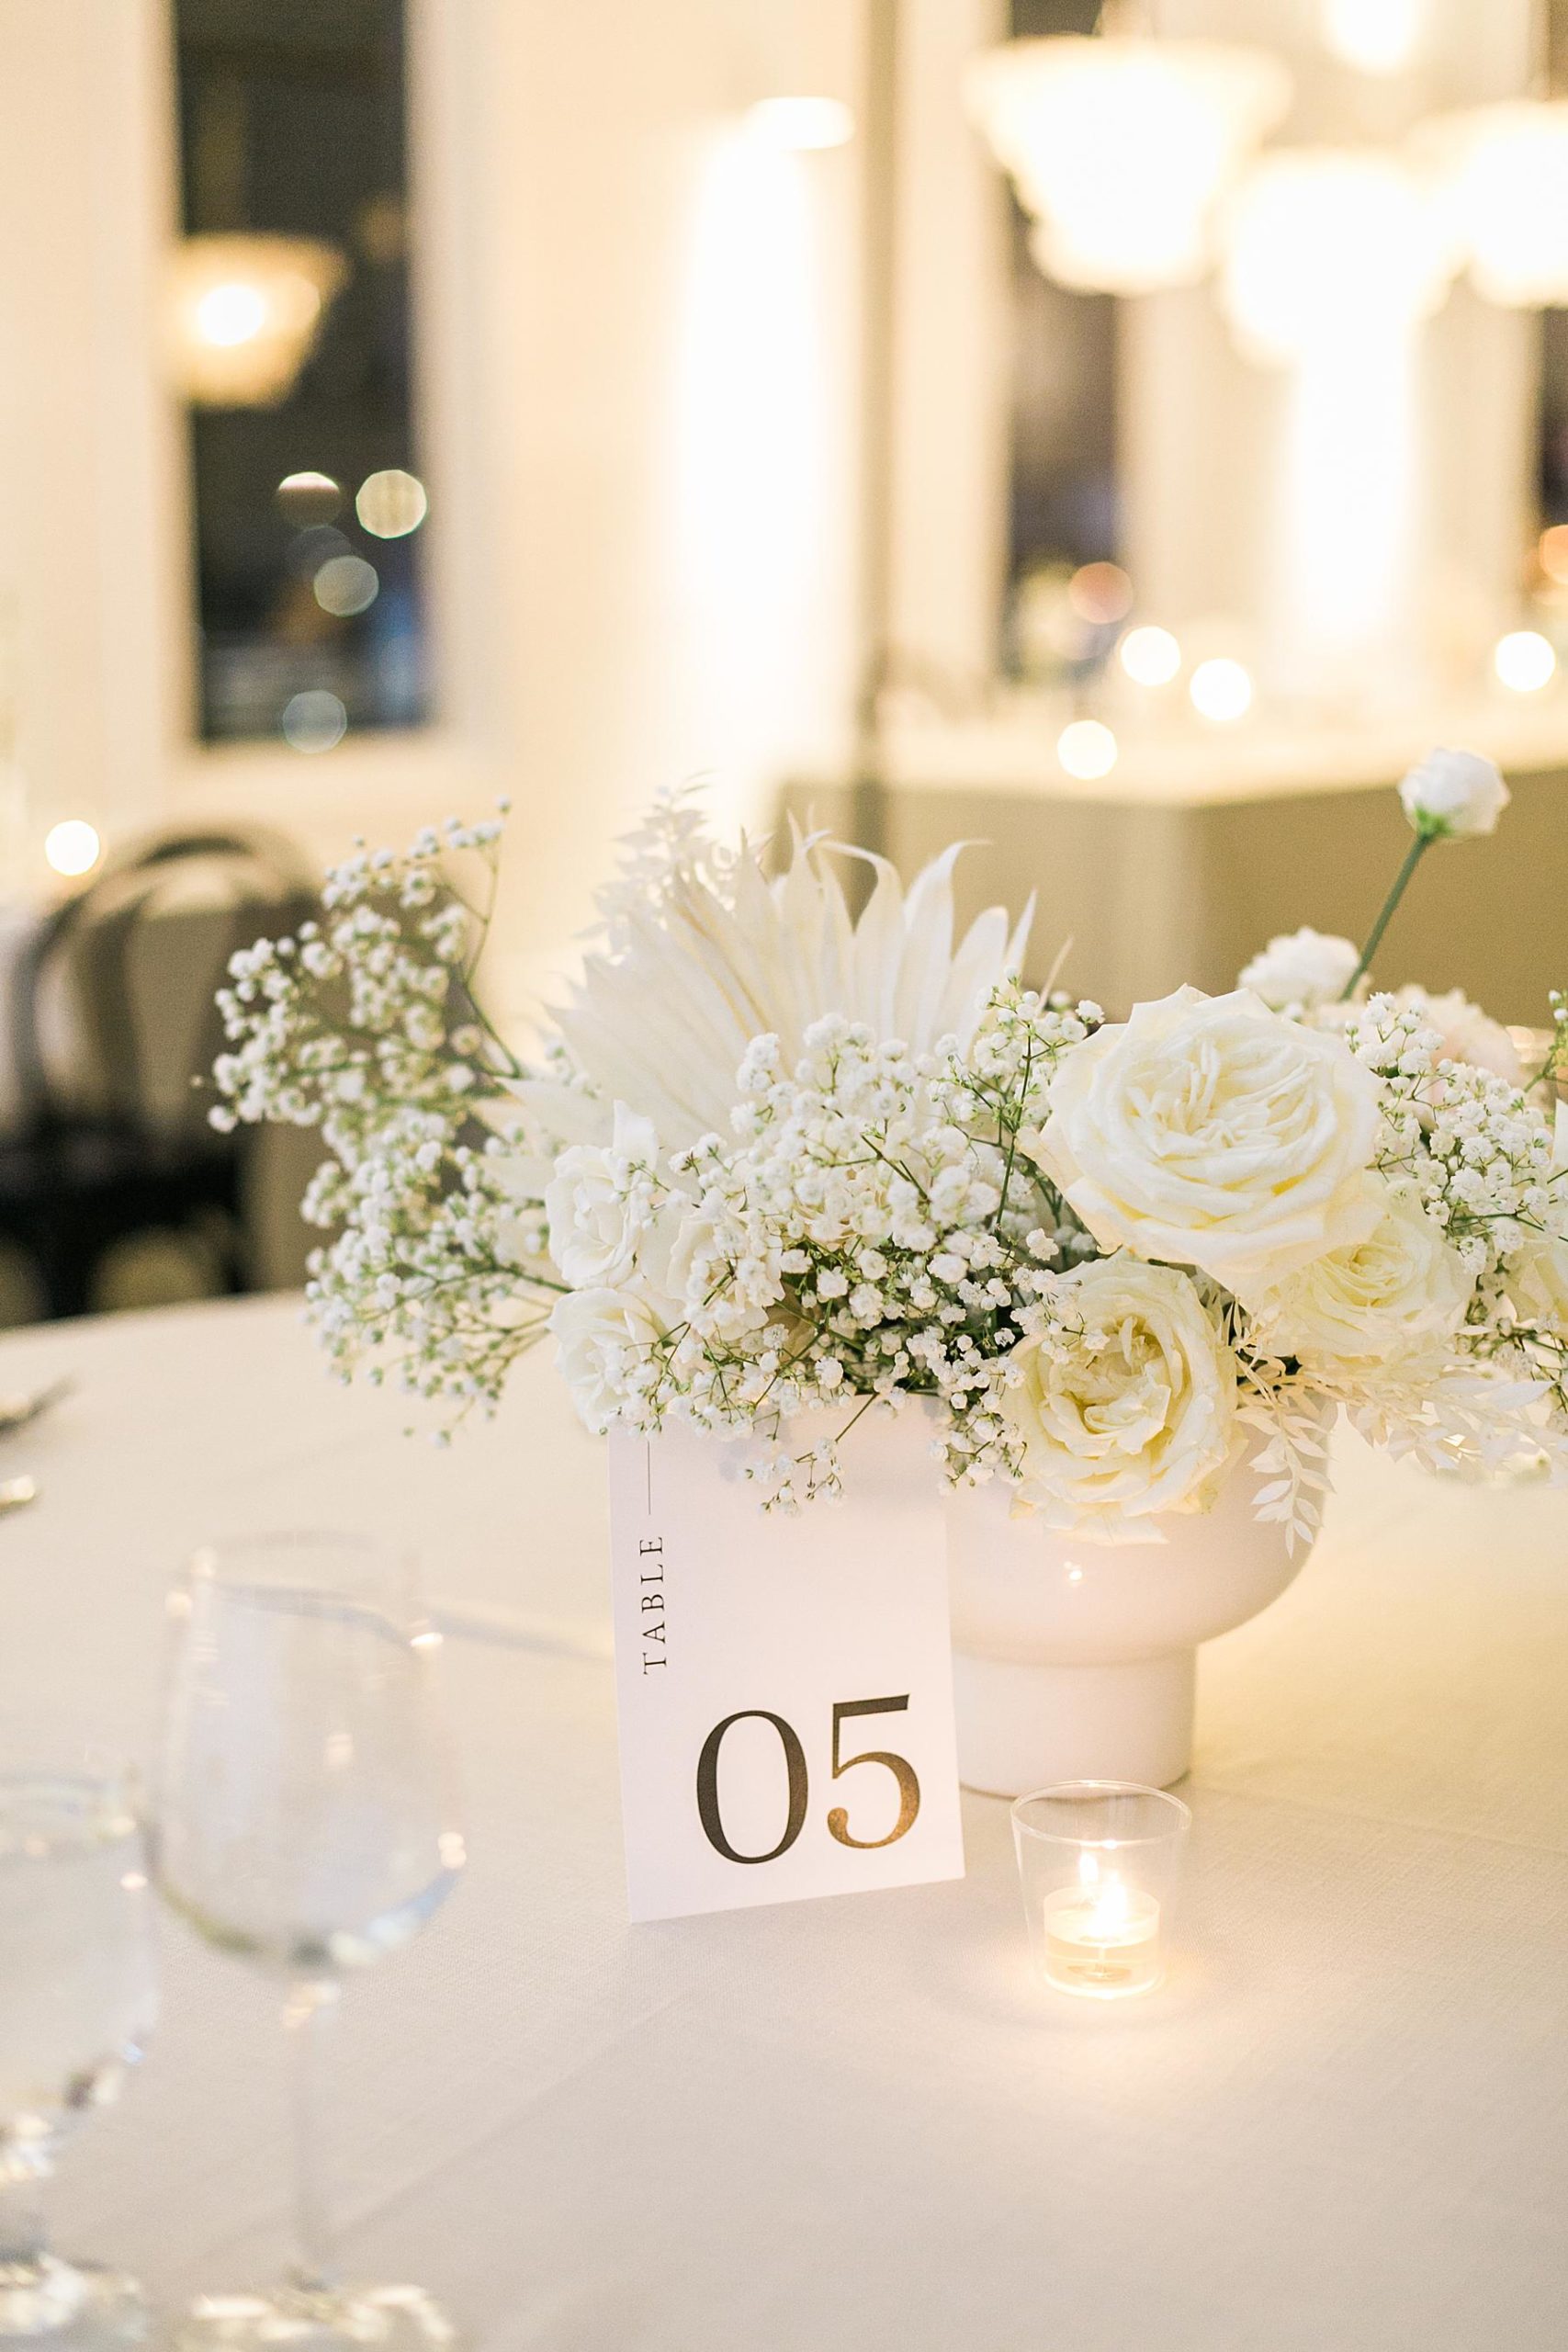 candlelight and black and white elegant boho reception table decor at hutton house wedding venue in minneapolis minnesota